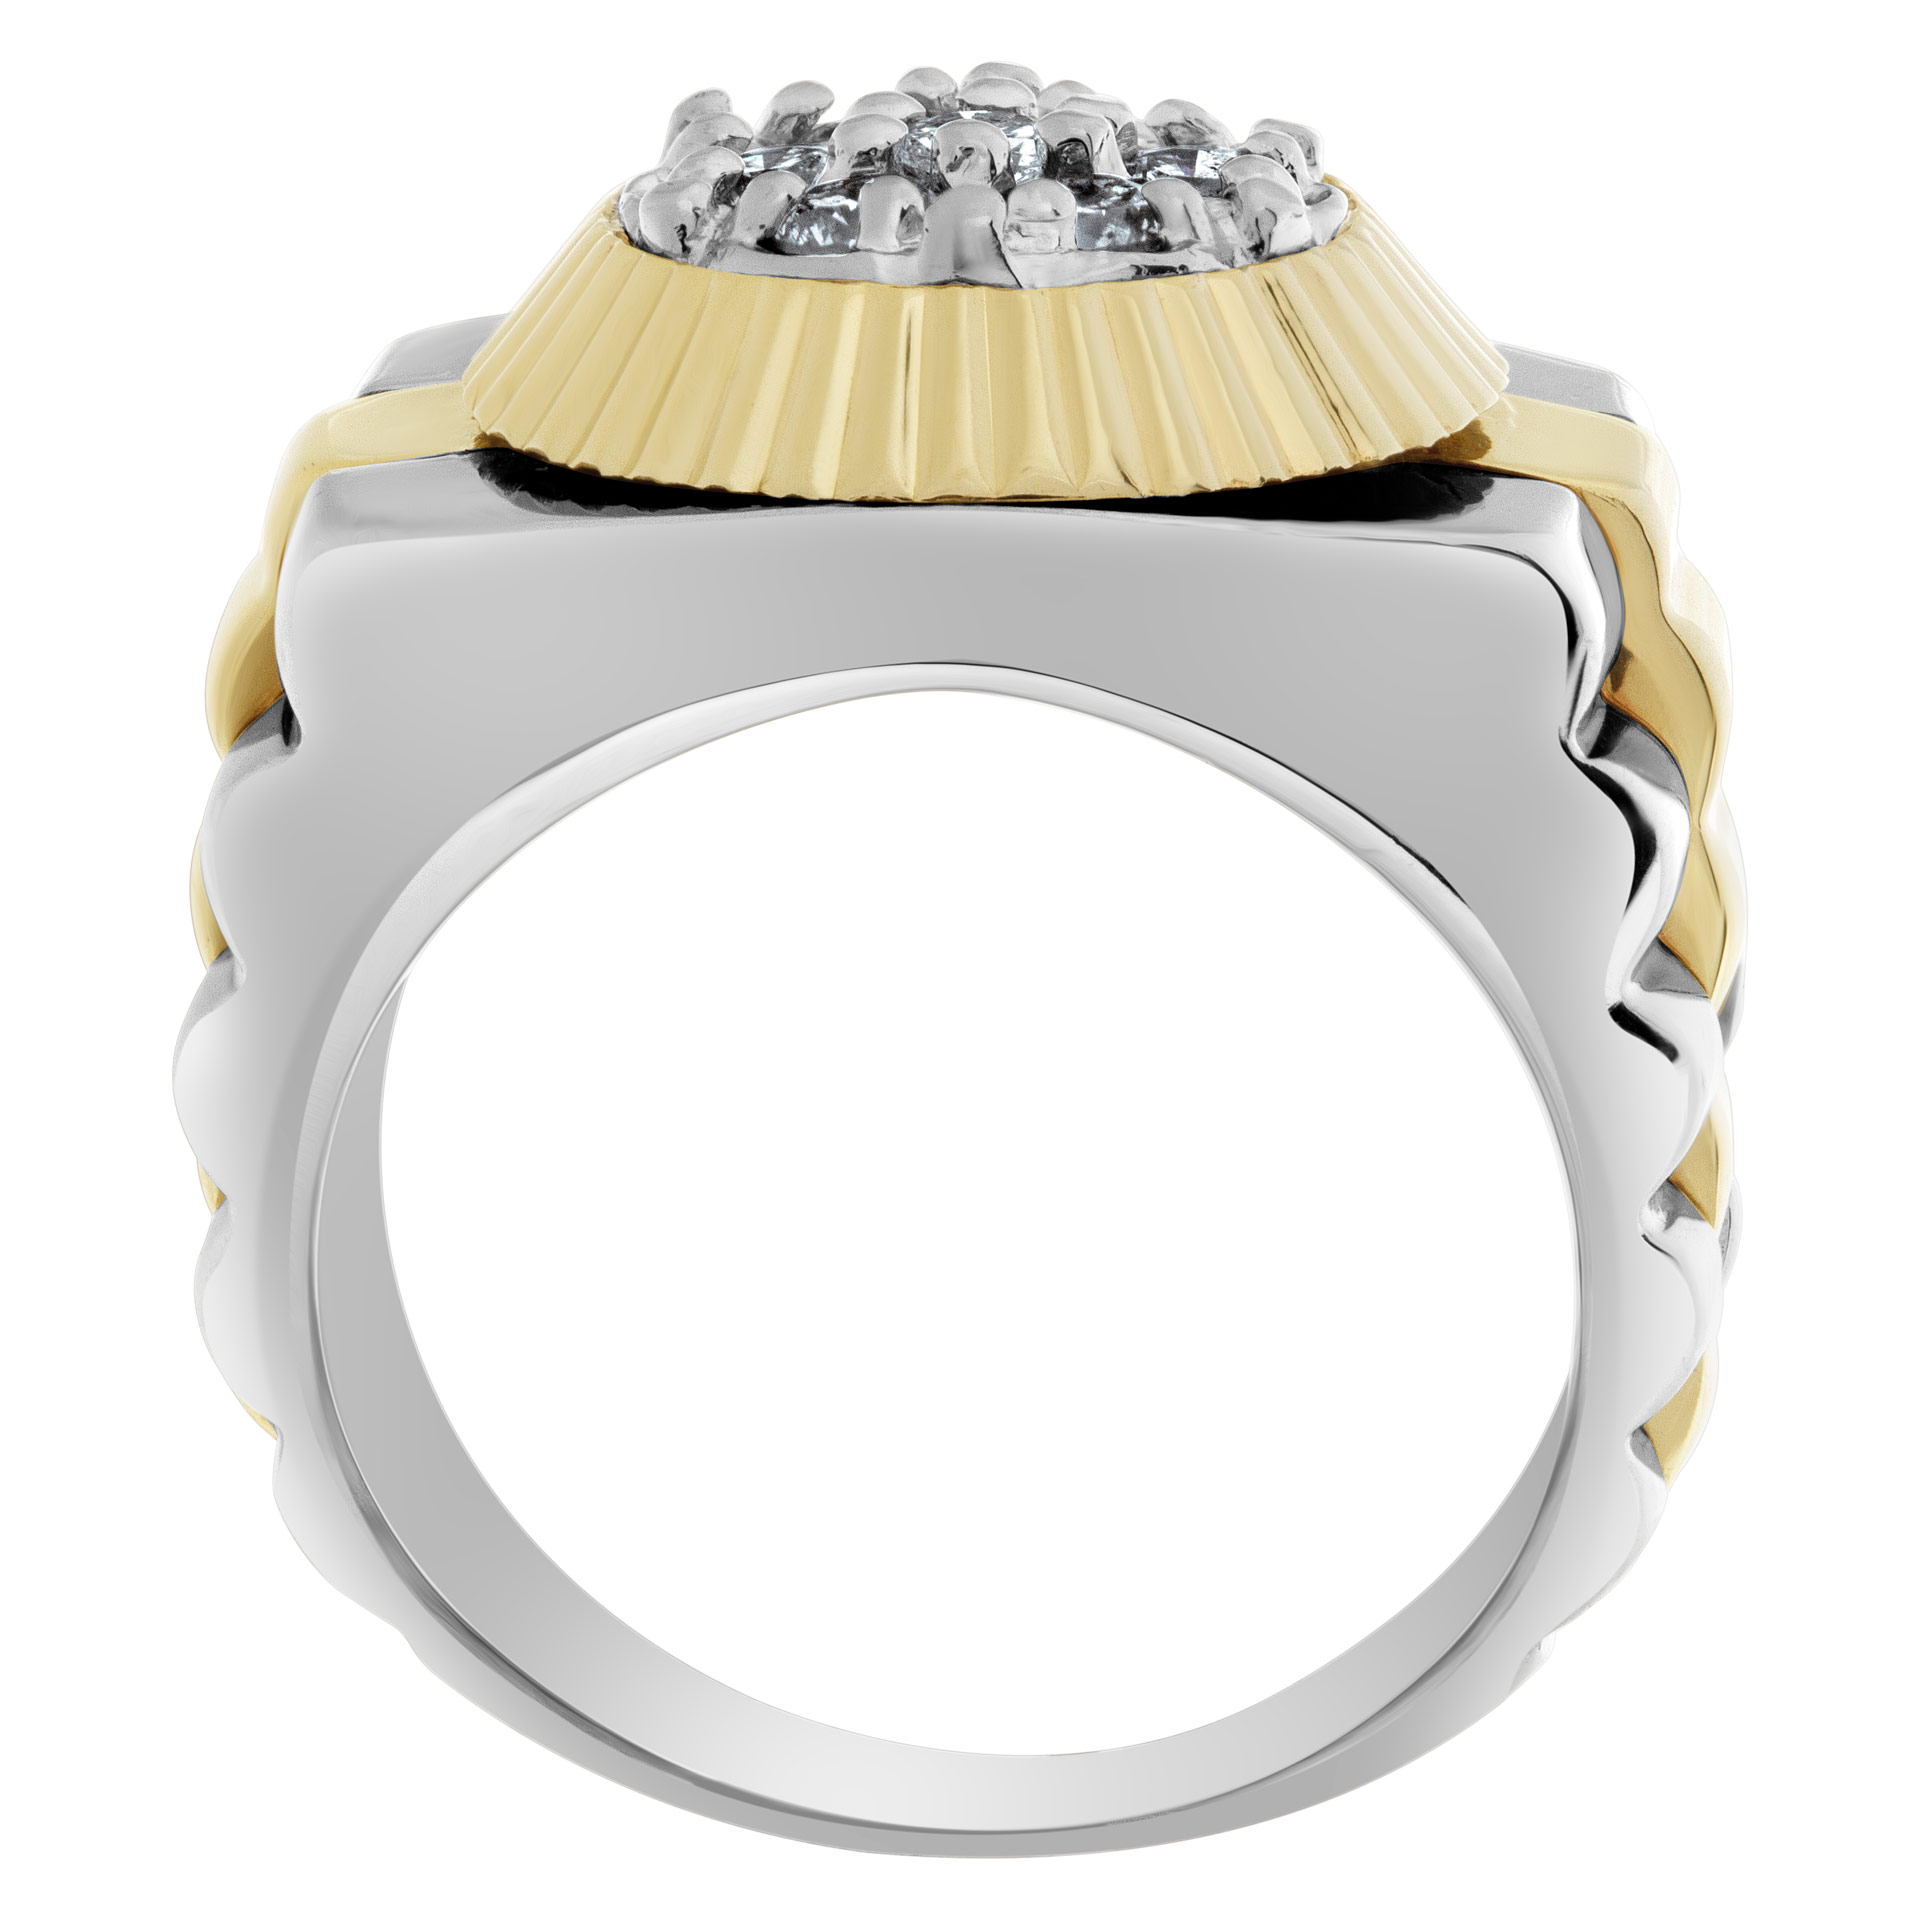 President style diamond ring in 14k white and yellow gold. image 4